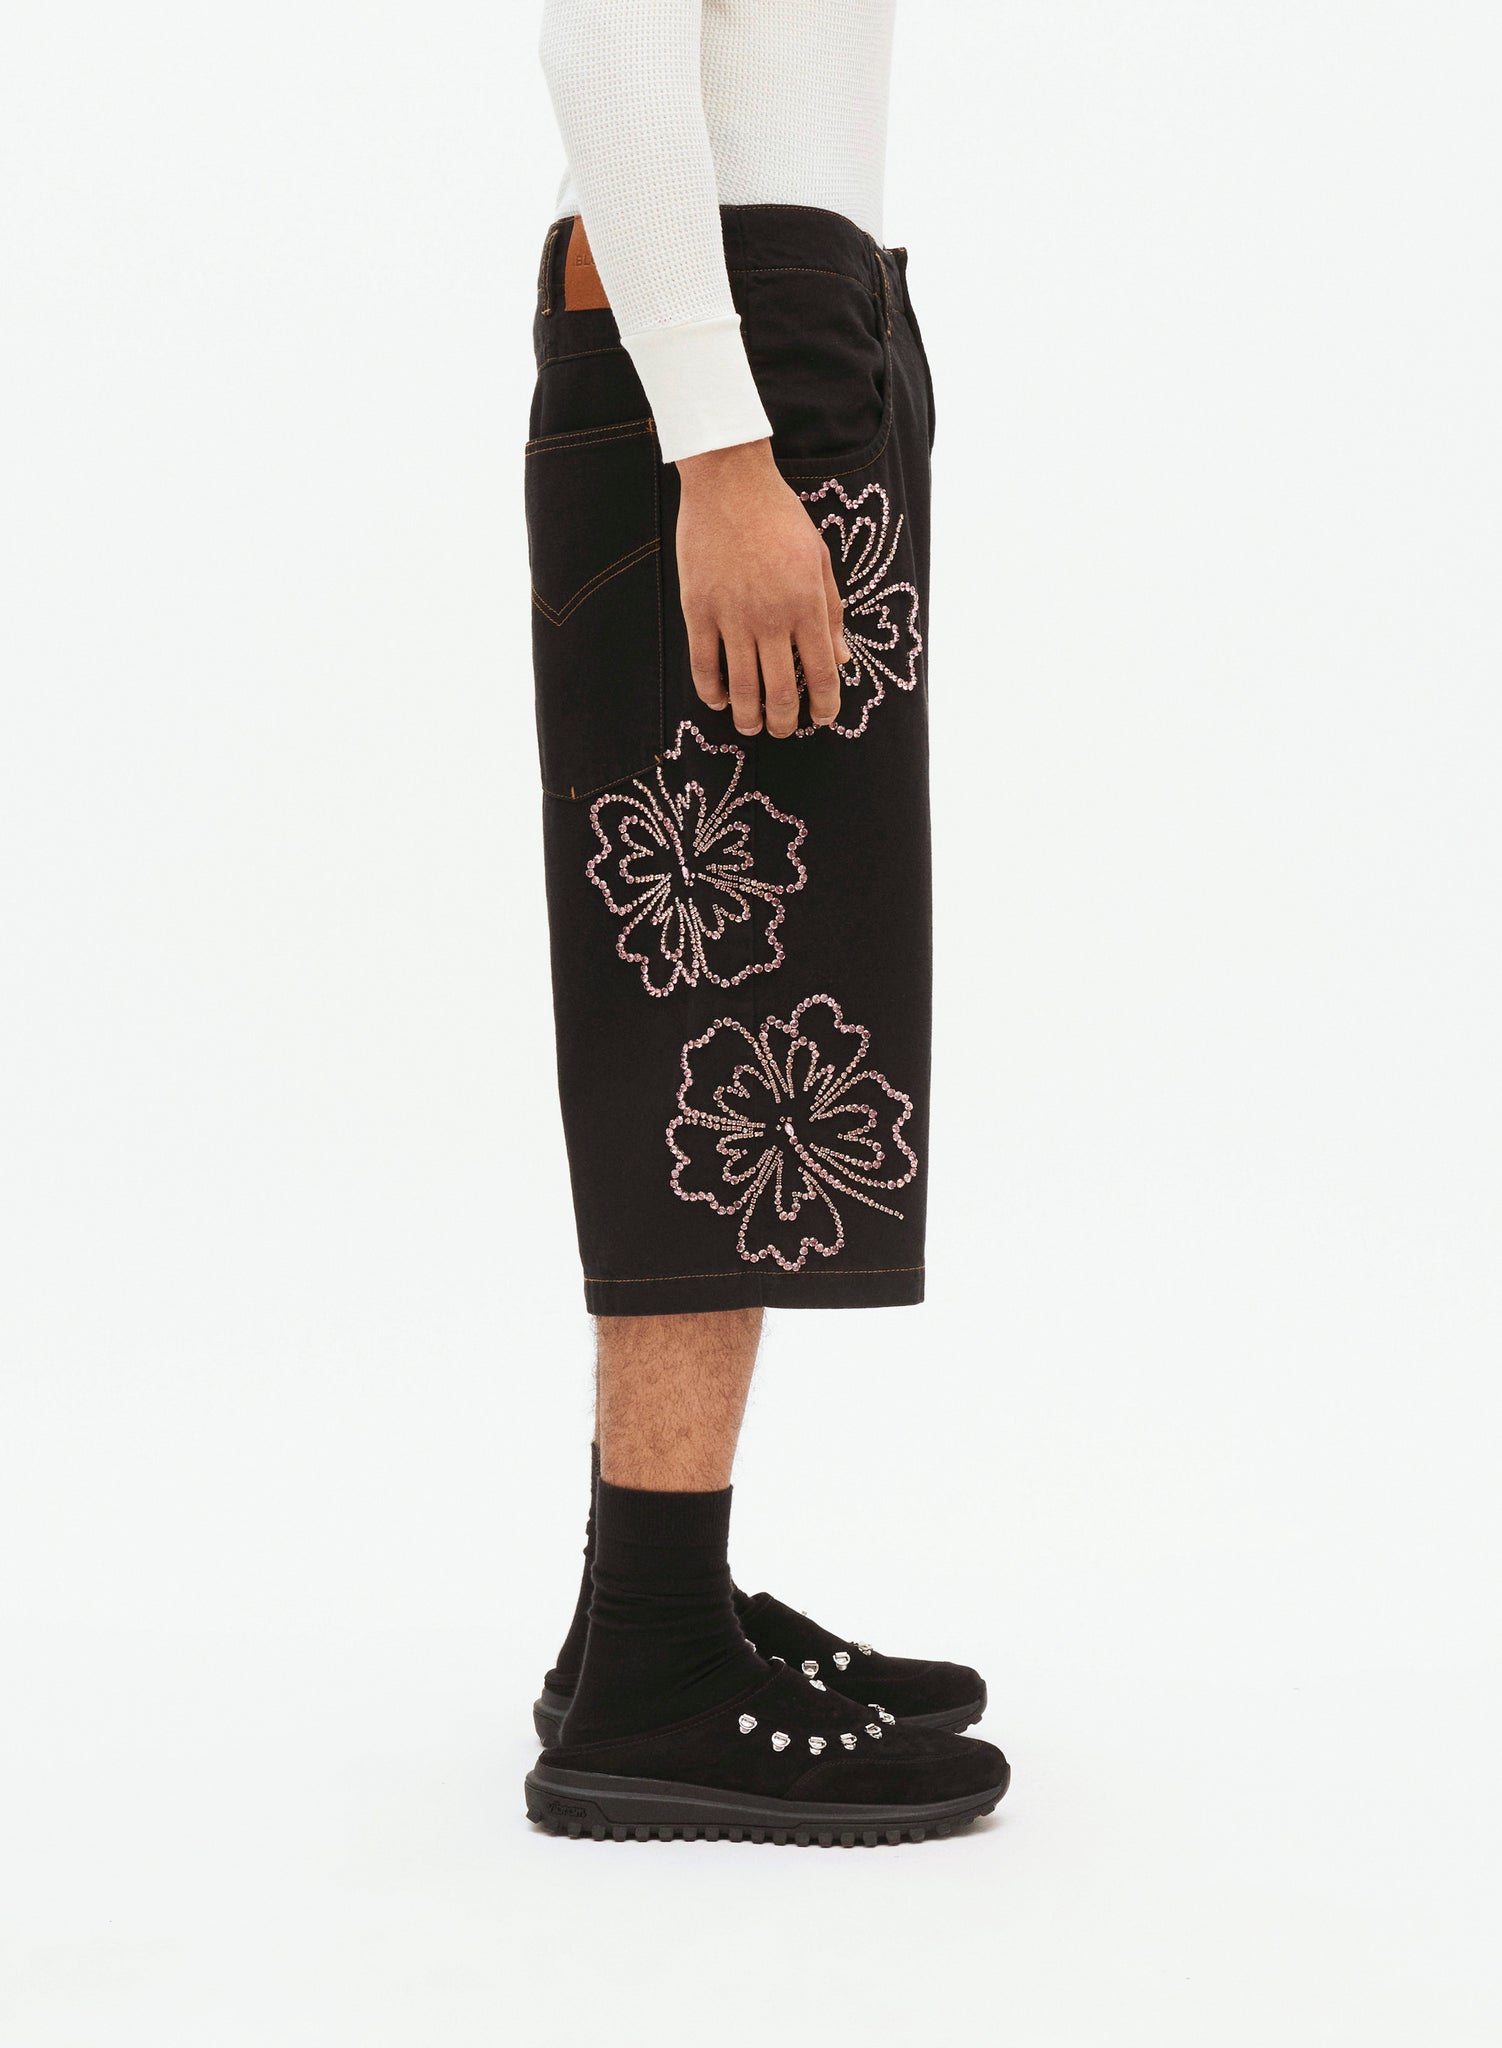 Black Embroidered Baggy Shorts